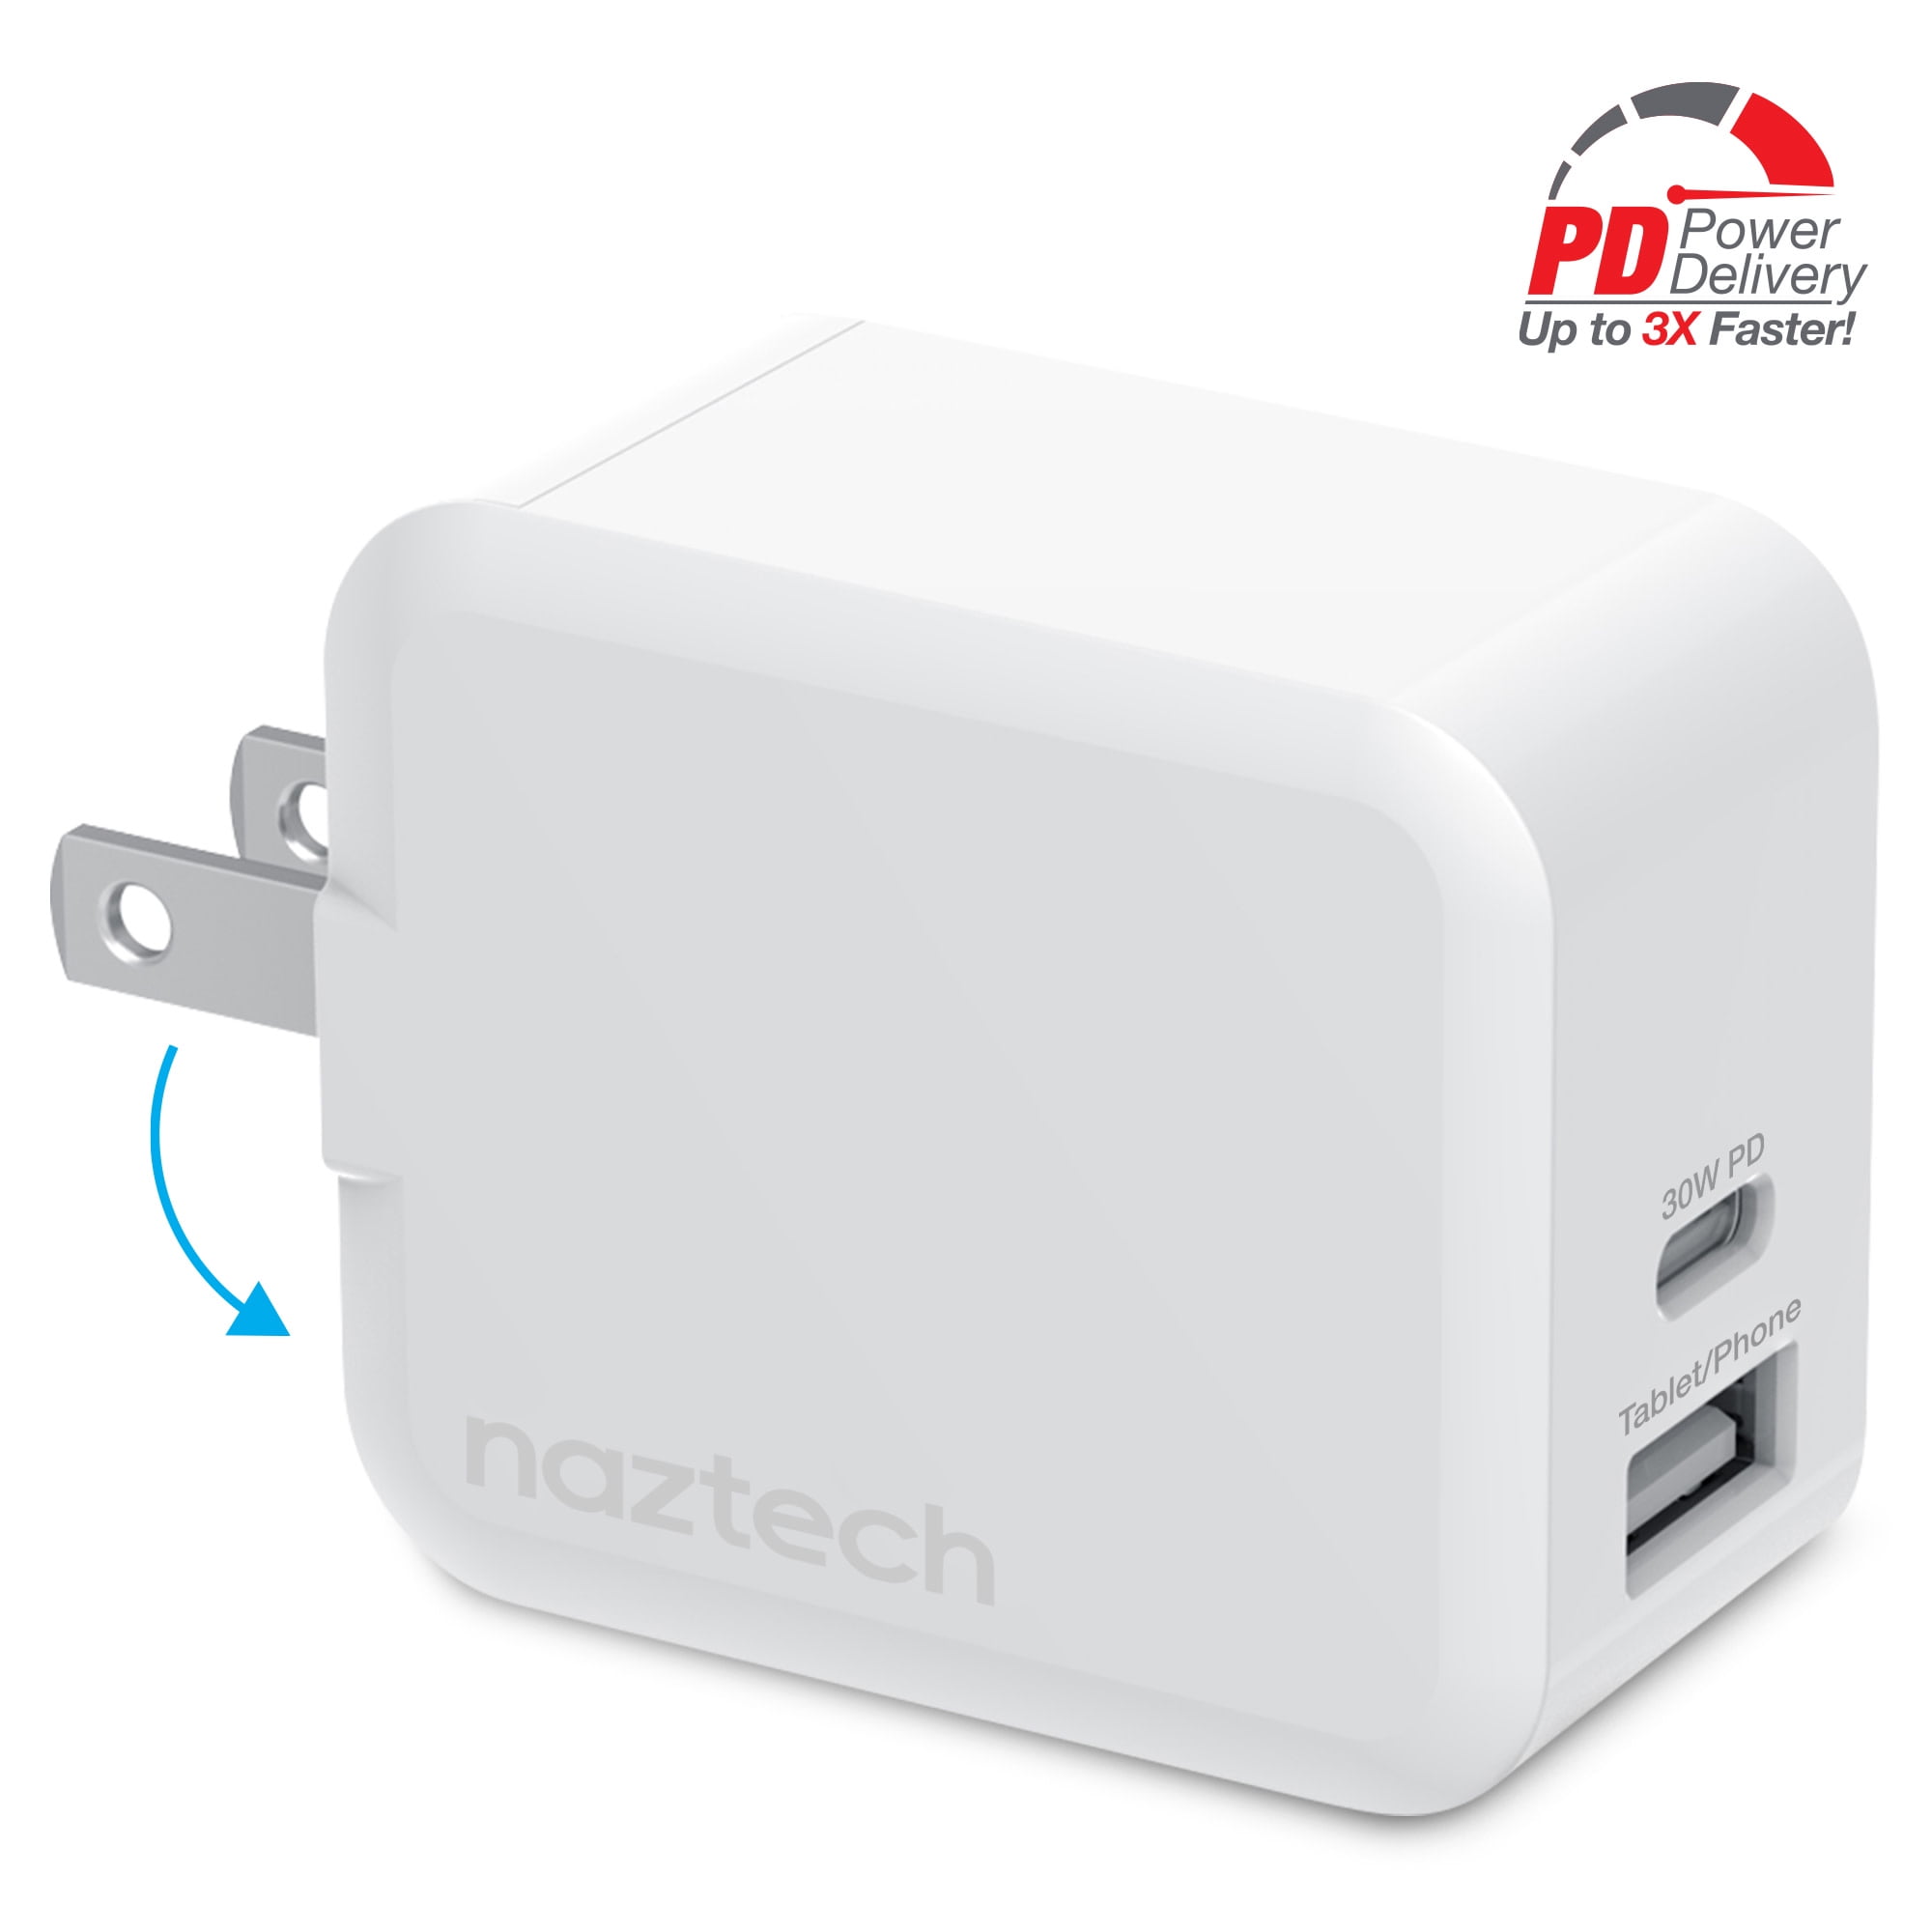 30W 2-PORT USB HOME WALL AC CHARGER ONE FAST PD TYPE-C PORT For PHONES & TABLETS 